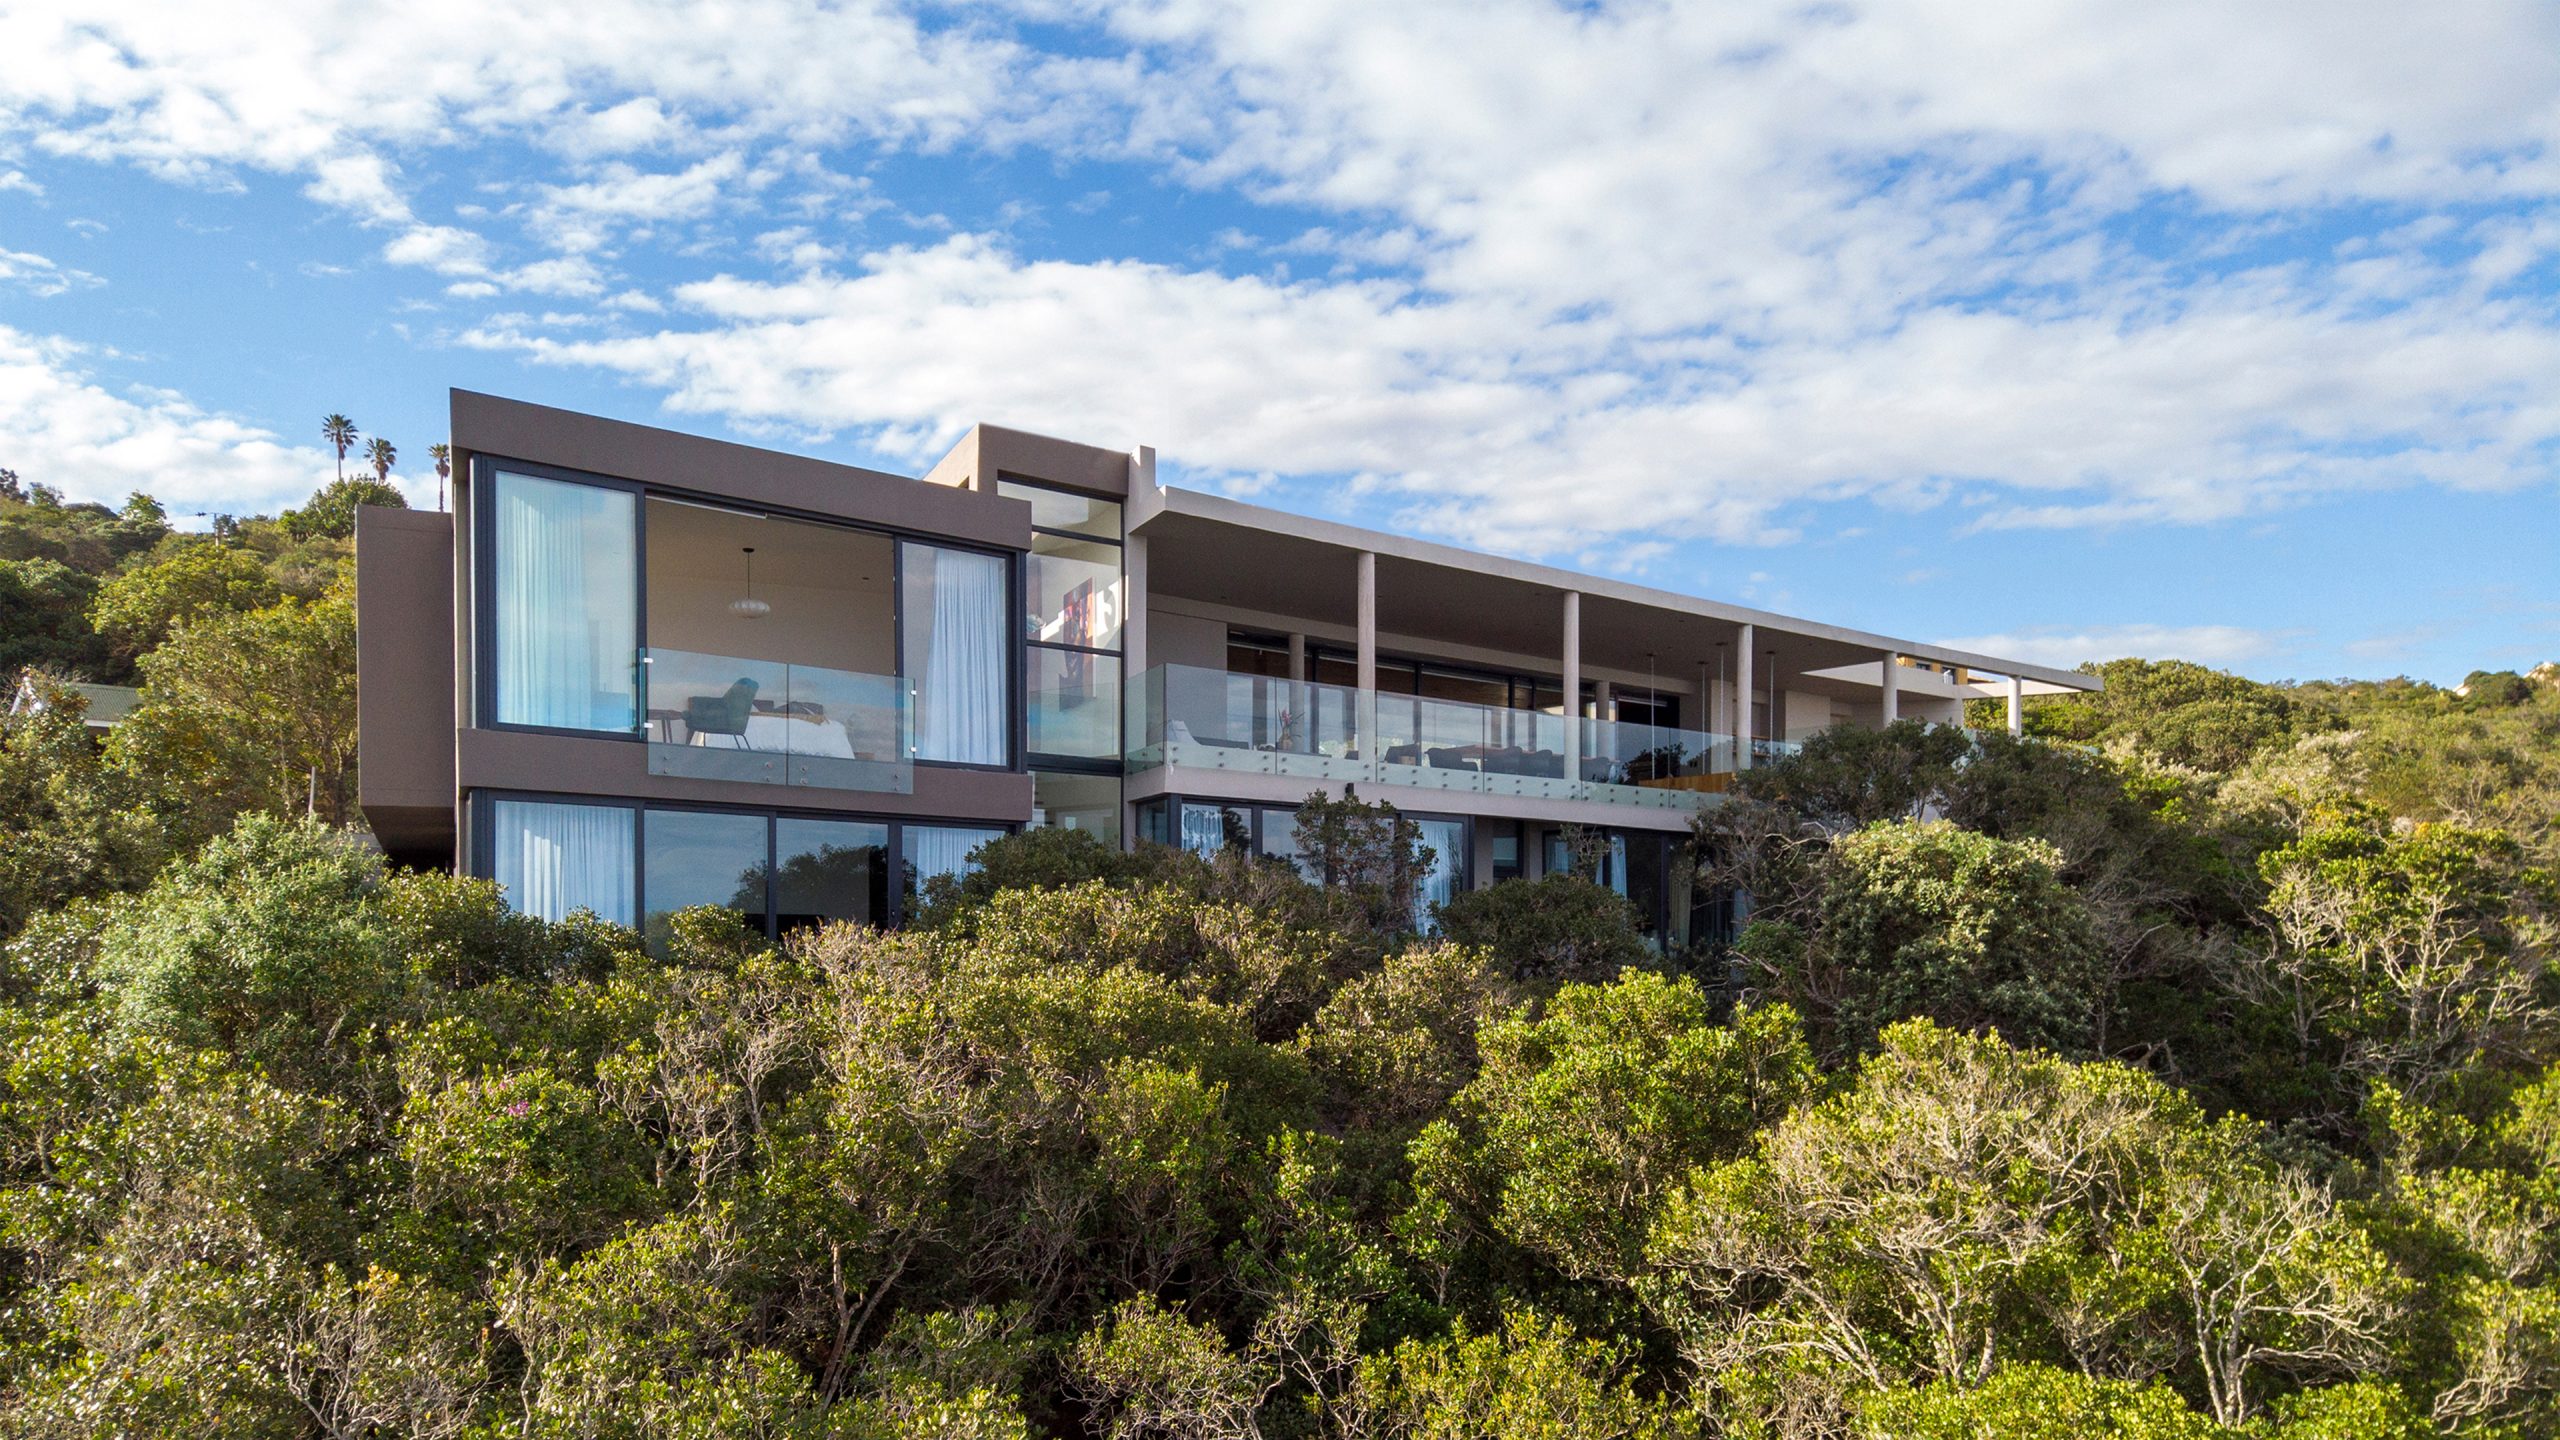 The Cliff House by Sergio Chinelli Architects sits amongst the forest, in perfect harmony with nature.